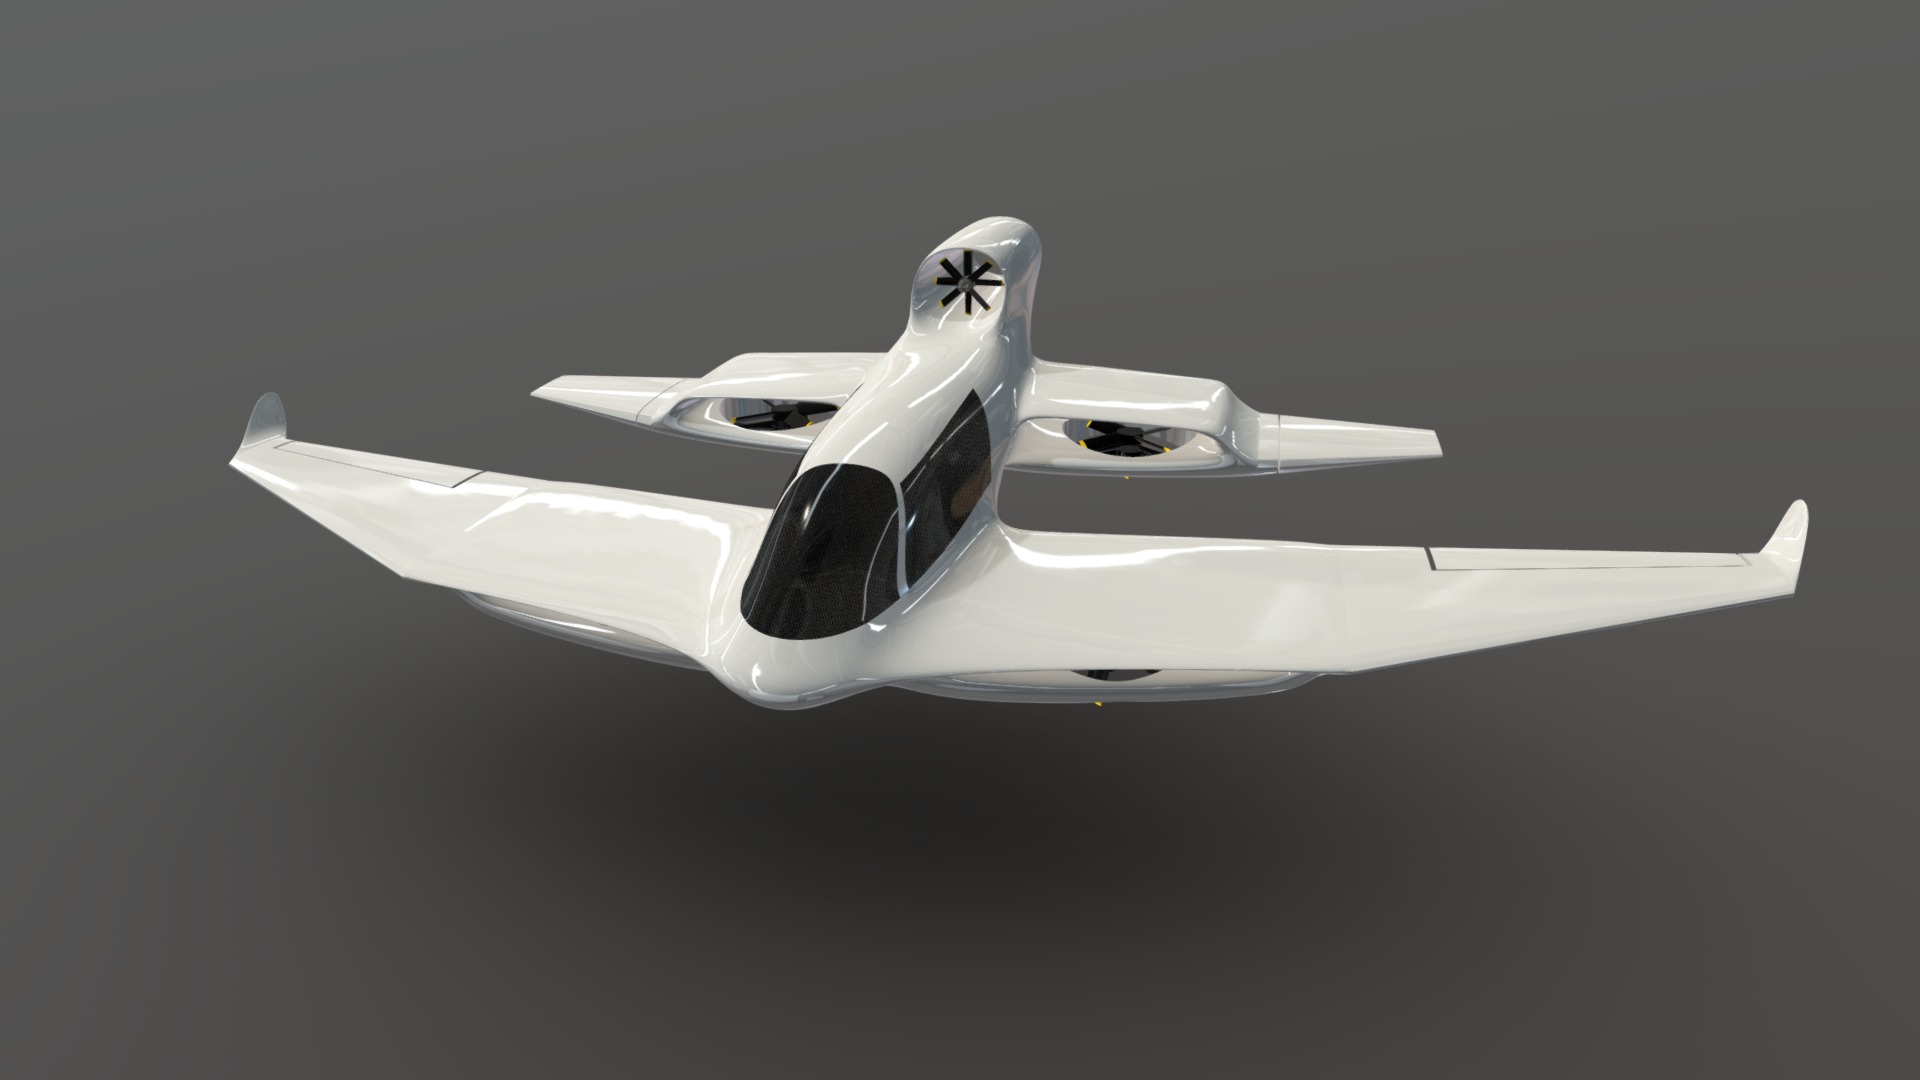 3D model Ghost X V4 eVTOL flying vehicle - This is a 3D model of the Ghost X V4 eVTOL flying vehicle. The 3D model is about a white model airplane.